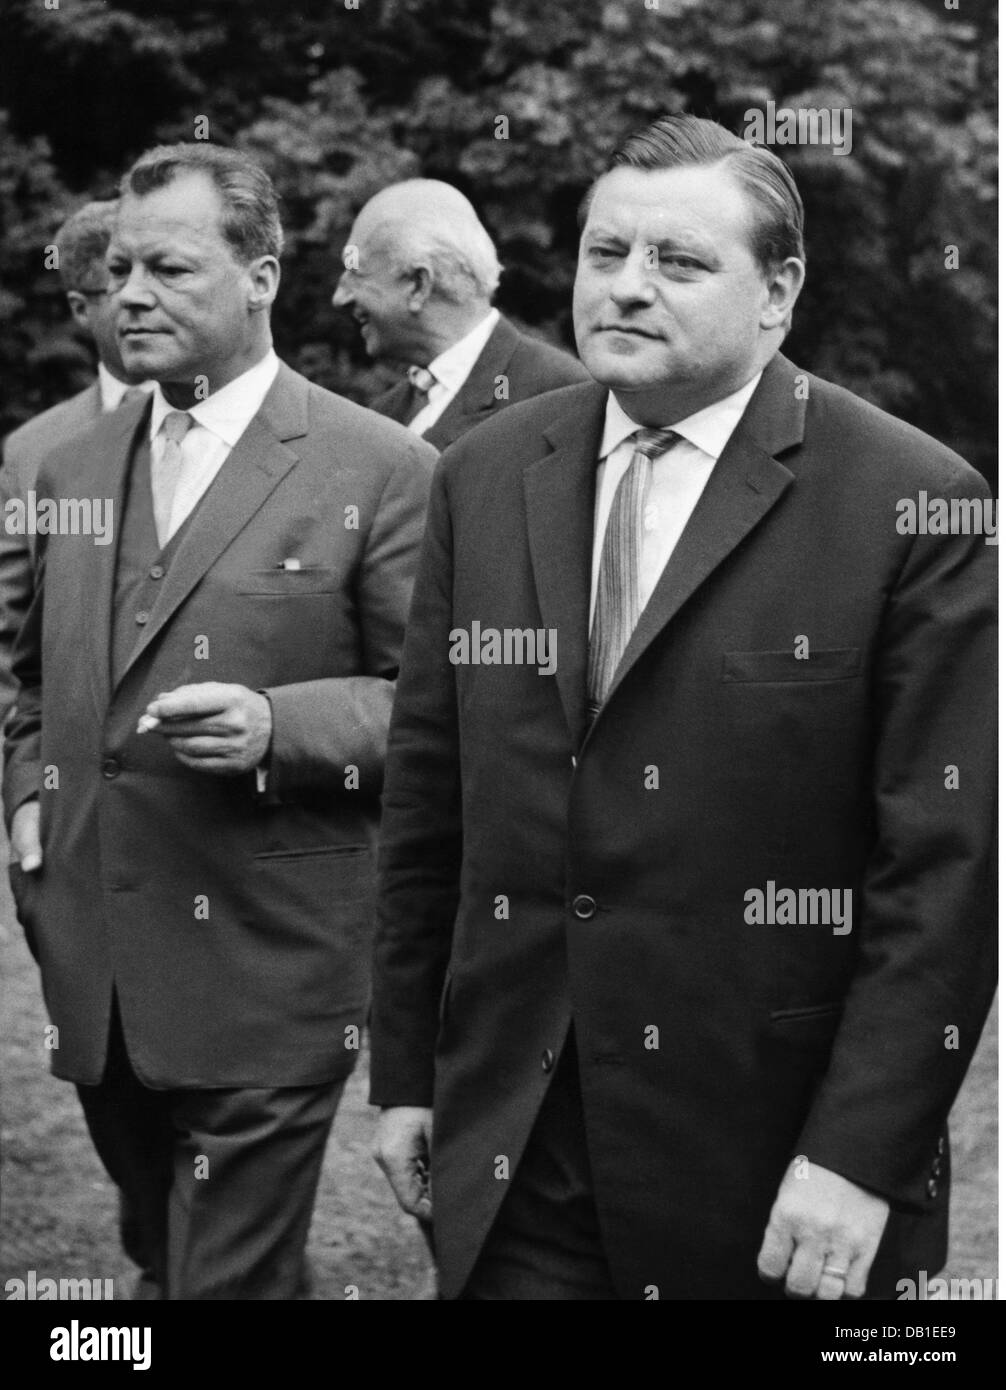 Strauss, Franz Josef, 6.9.1915 - 3.10.1988, German politician (CSU), Federal Minister of Defence 16.10.1956 - 9.1.1963, with the governing mayor of Berlin Willy Brandt (SPD), event at castle Tutzing, 11.7.1961, Stock Photo